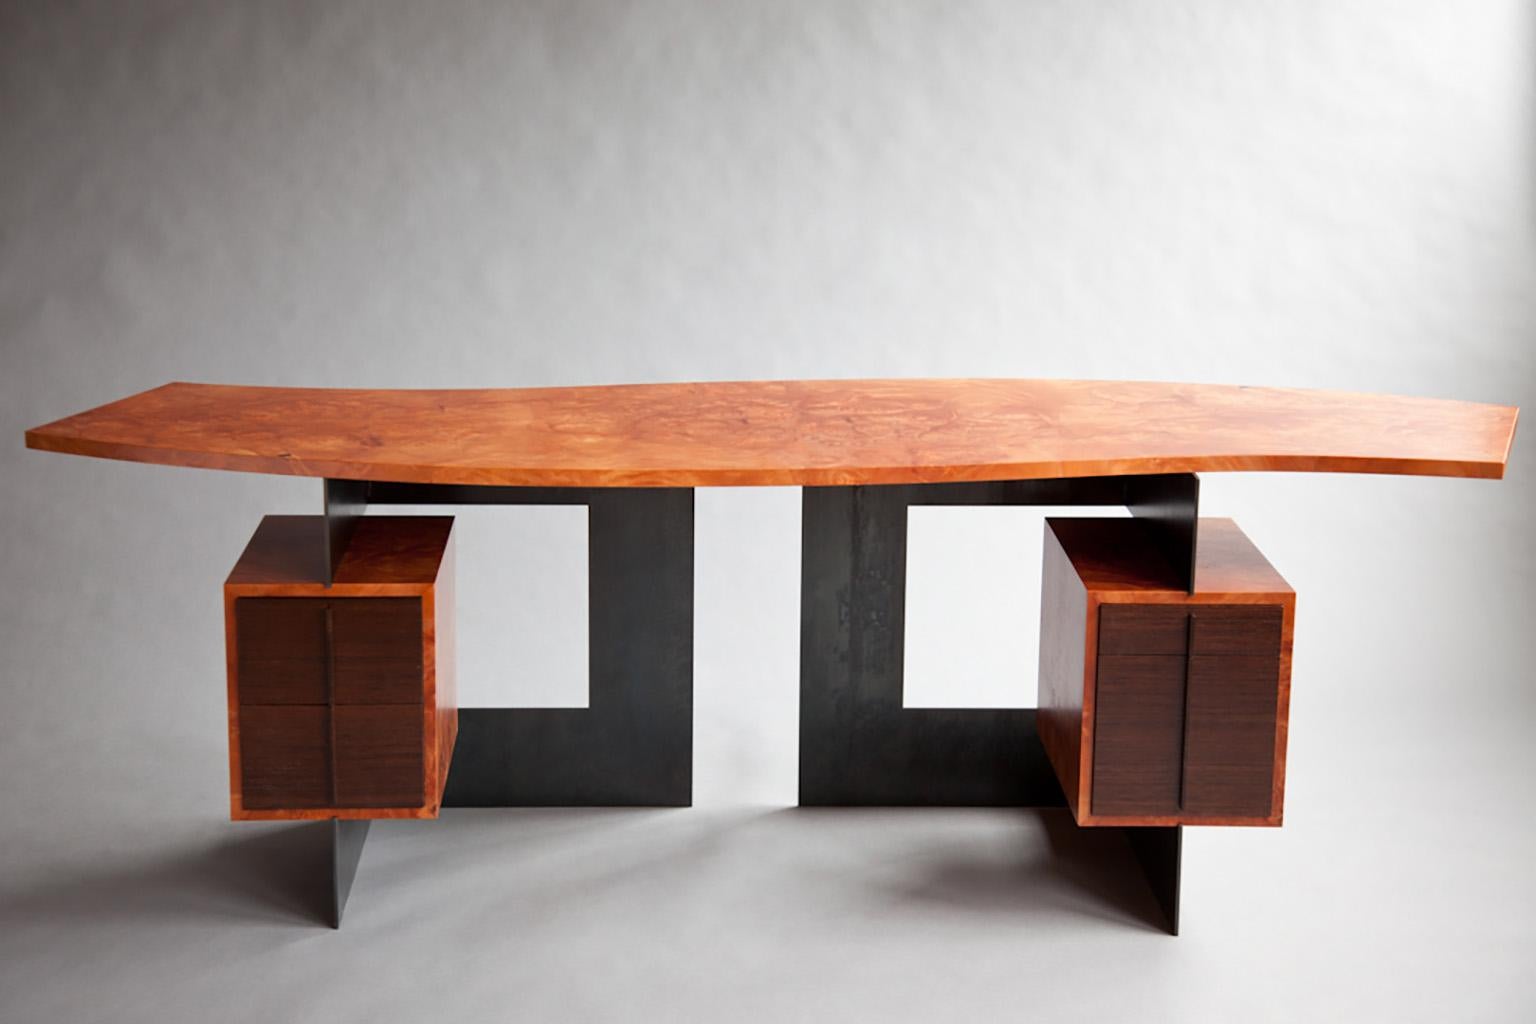 The Cinnamon desk is a hand made modern design by Adam Bentz. Each commission draws on significant craftsmanship & creative energy to achieve an exceptional level of quality & attention to detail. The piece creates a design language which captures